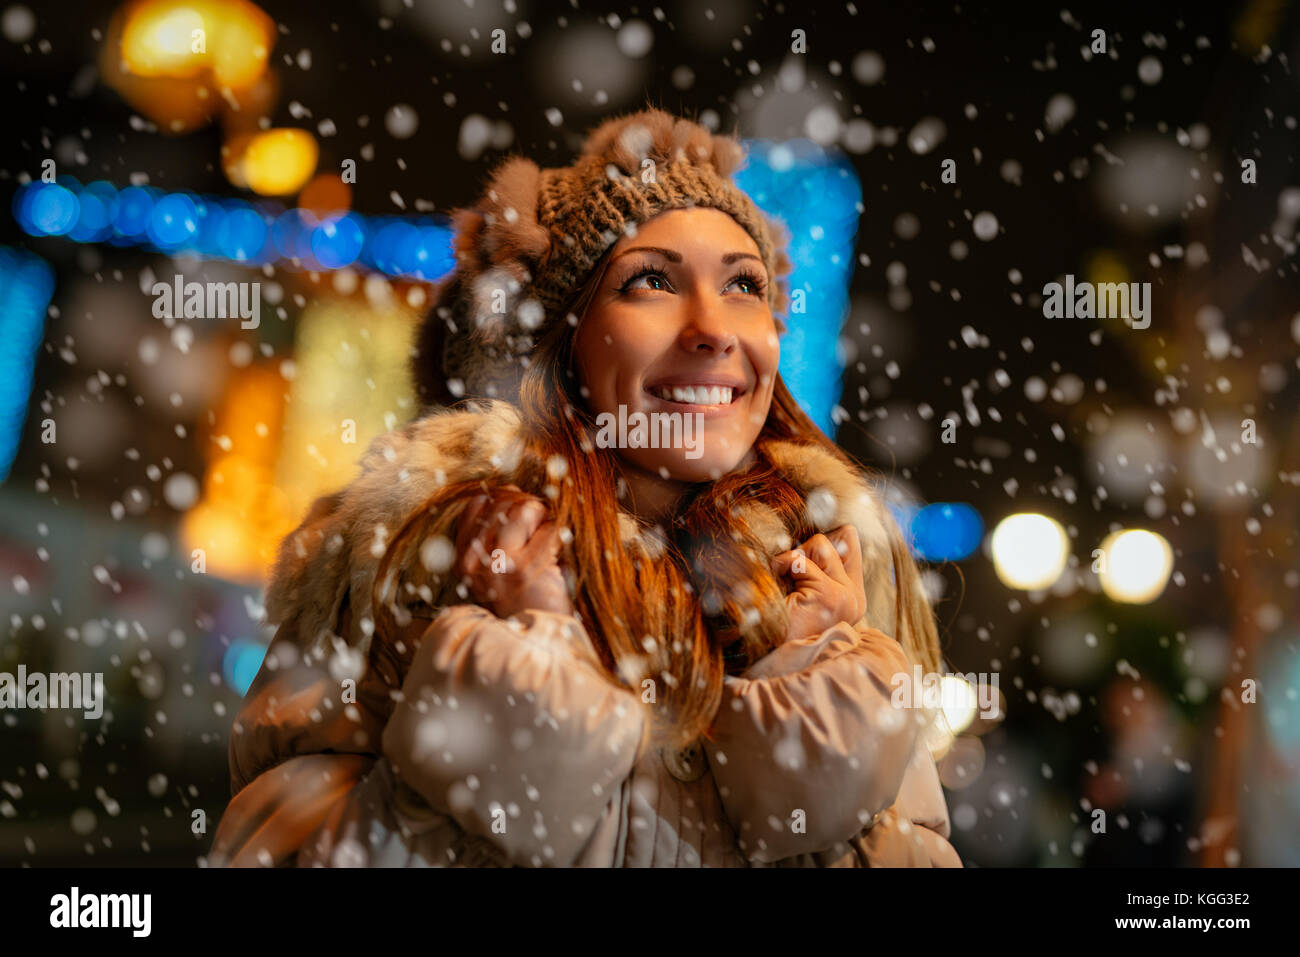 Smiling beautiful young woman in warm clothing enjoying while snowing in winter holiday time. Stock Photo